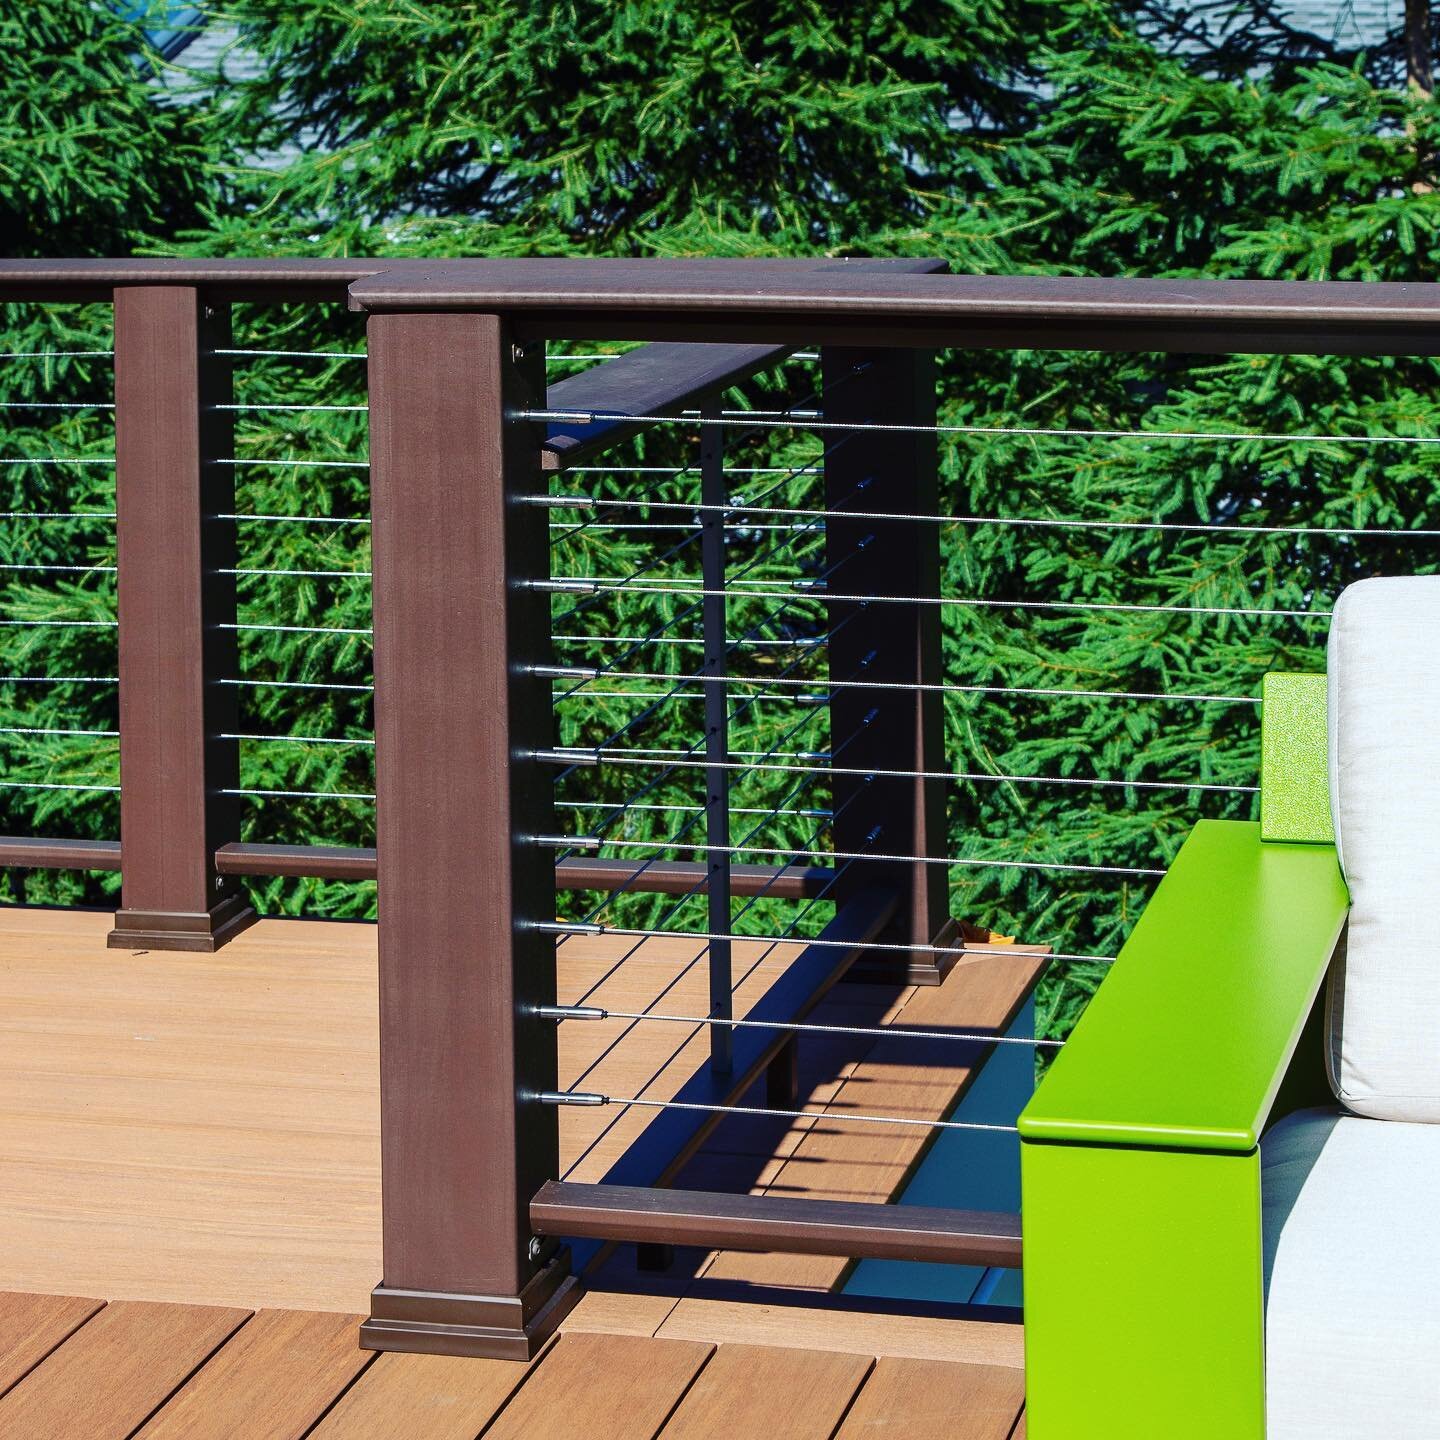 This mid-century home deck rebuild used a great looking cable rail system by Feeney.  Keeps the breezes coming and leaves the views open. @feeneyinc #midcenturyupdate #moderndeck #deckdesign #deckrailing #westchestercountyarchitect #design photo by @